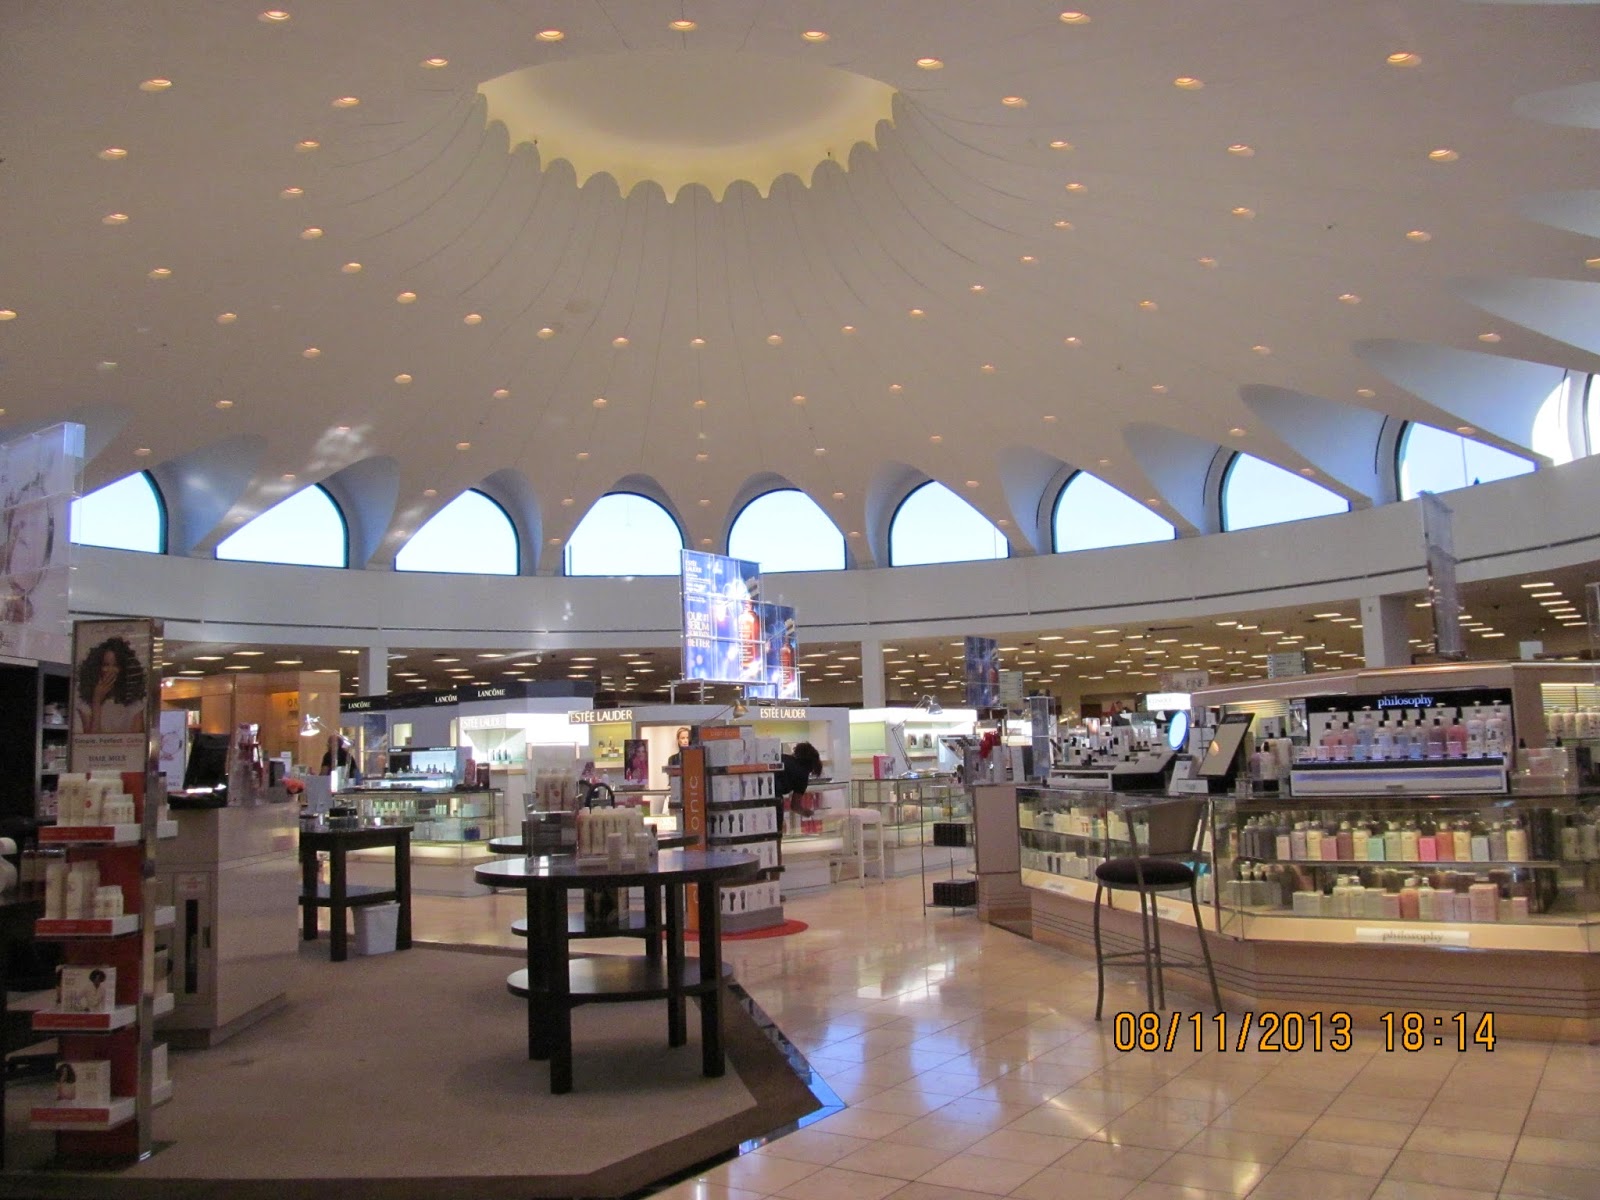 Trip to the Mall: St. Clair Square Mall- (Fairview Heights, IL)